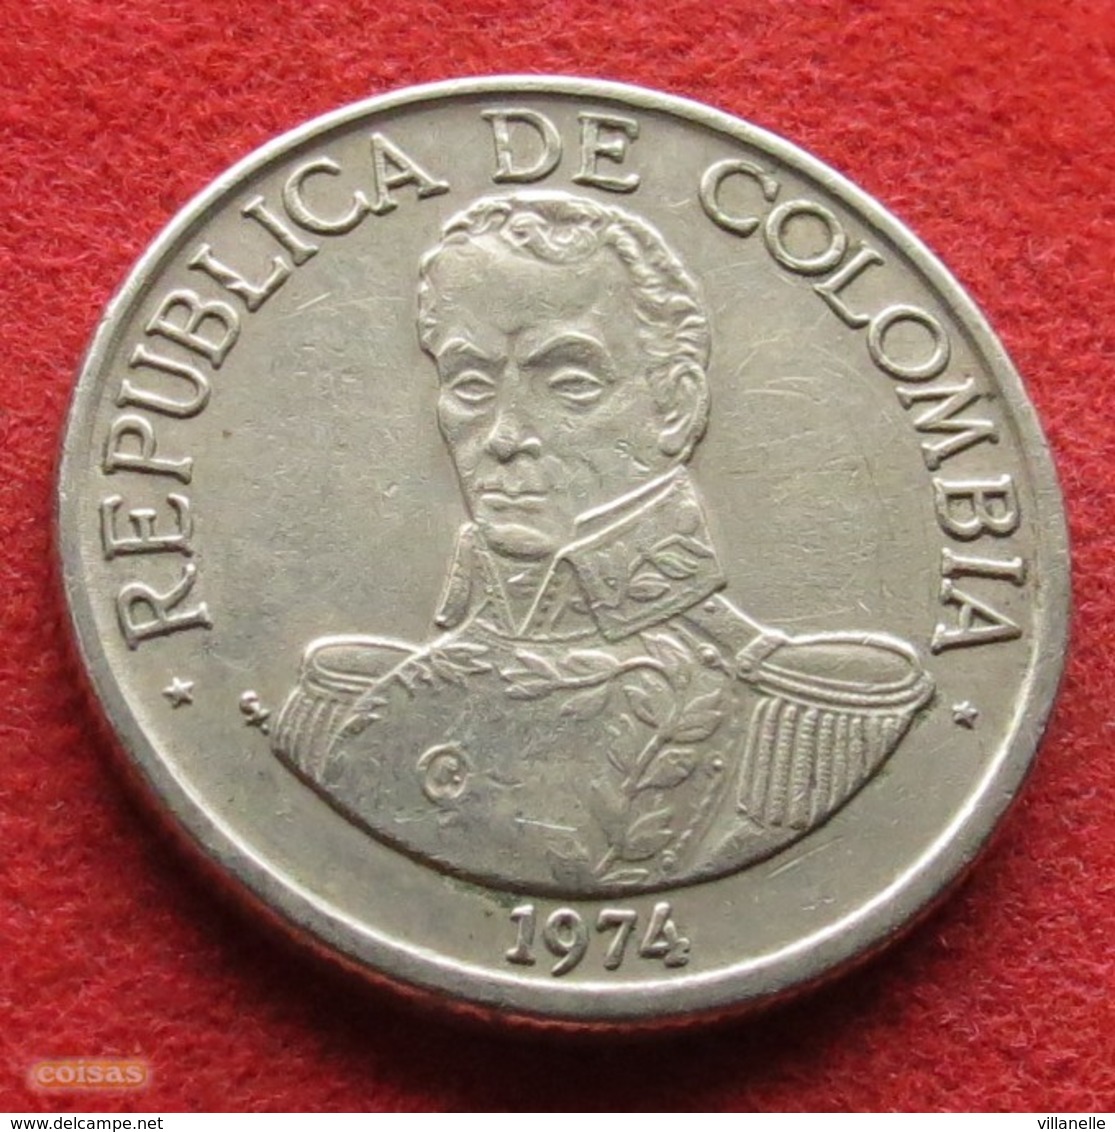 Colombia 1 Peso 1974 KM# 258.1 Colombie - Colombia